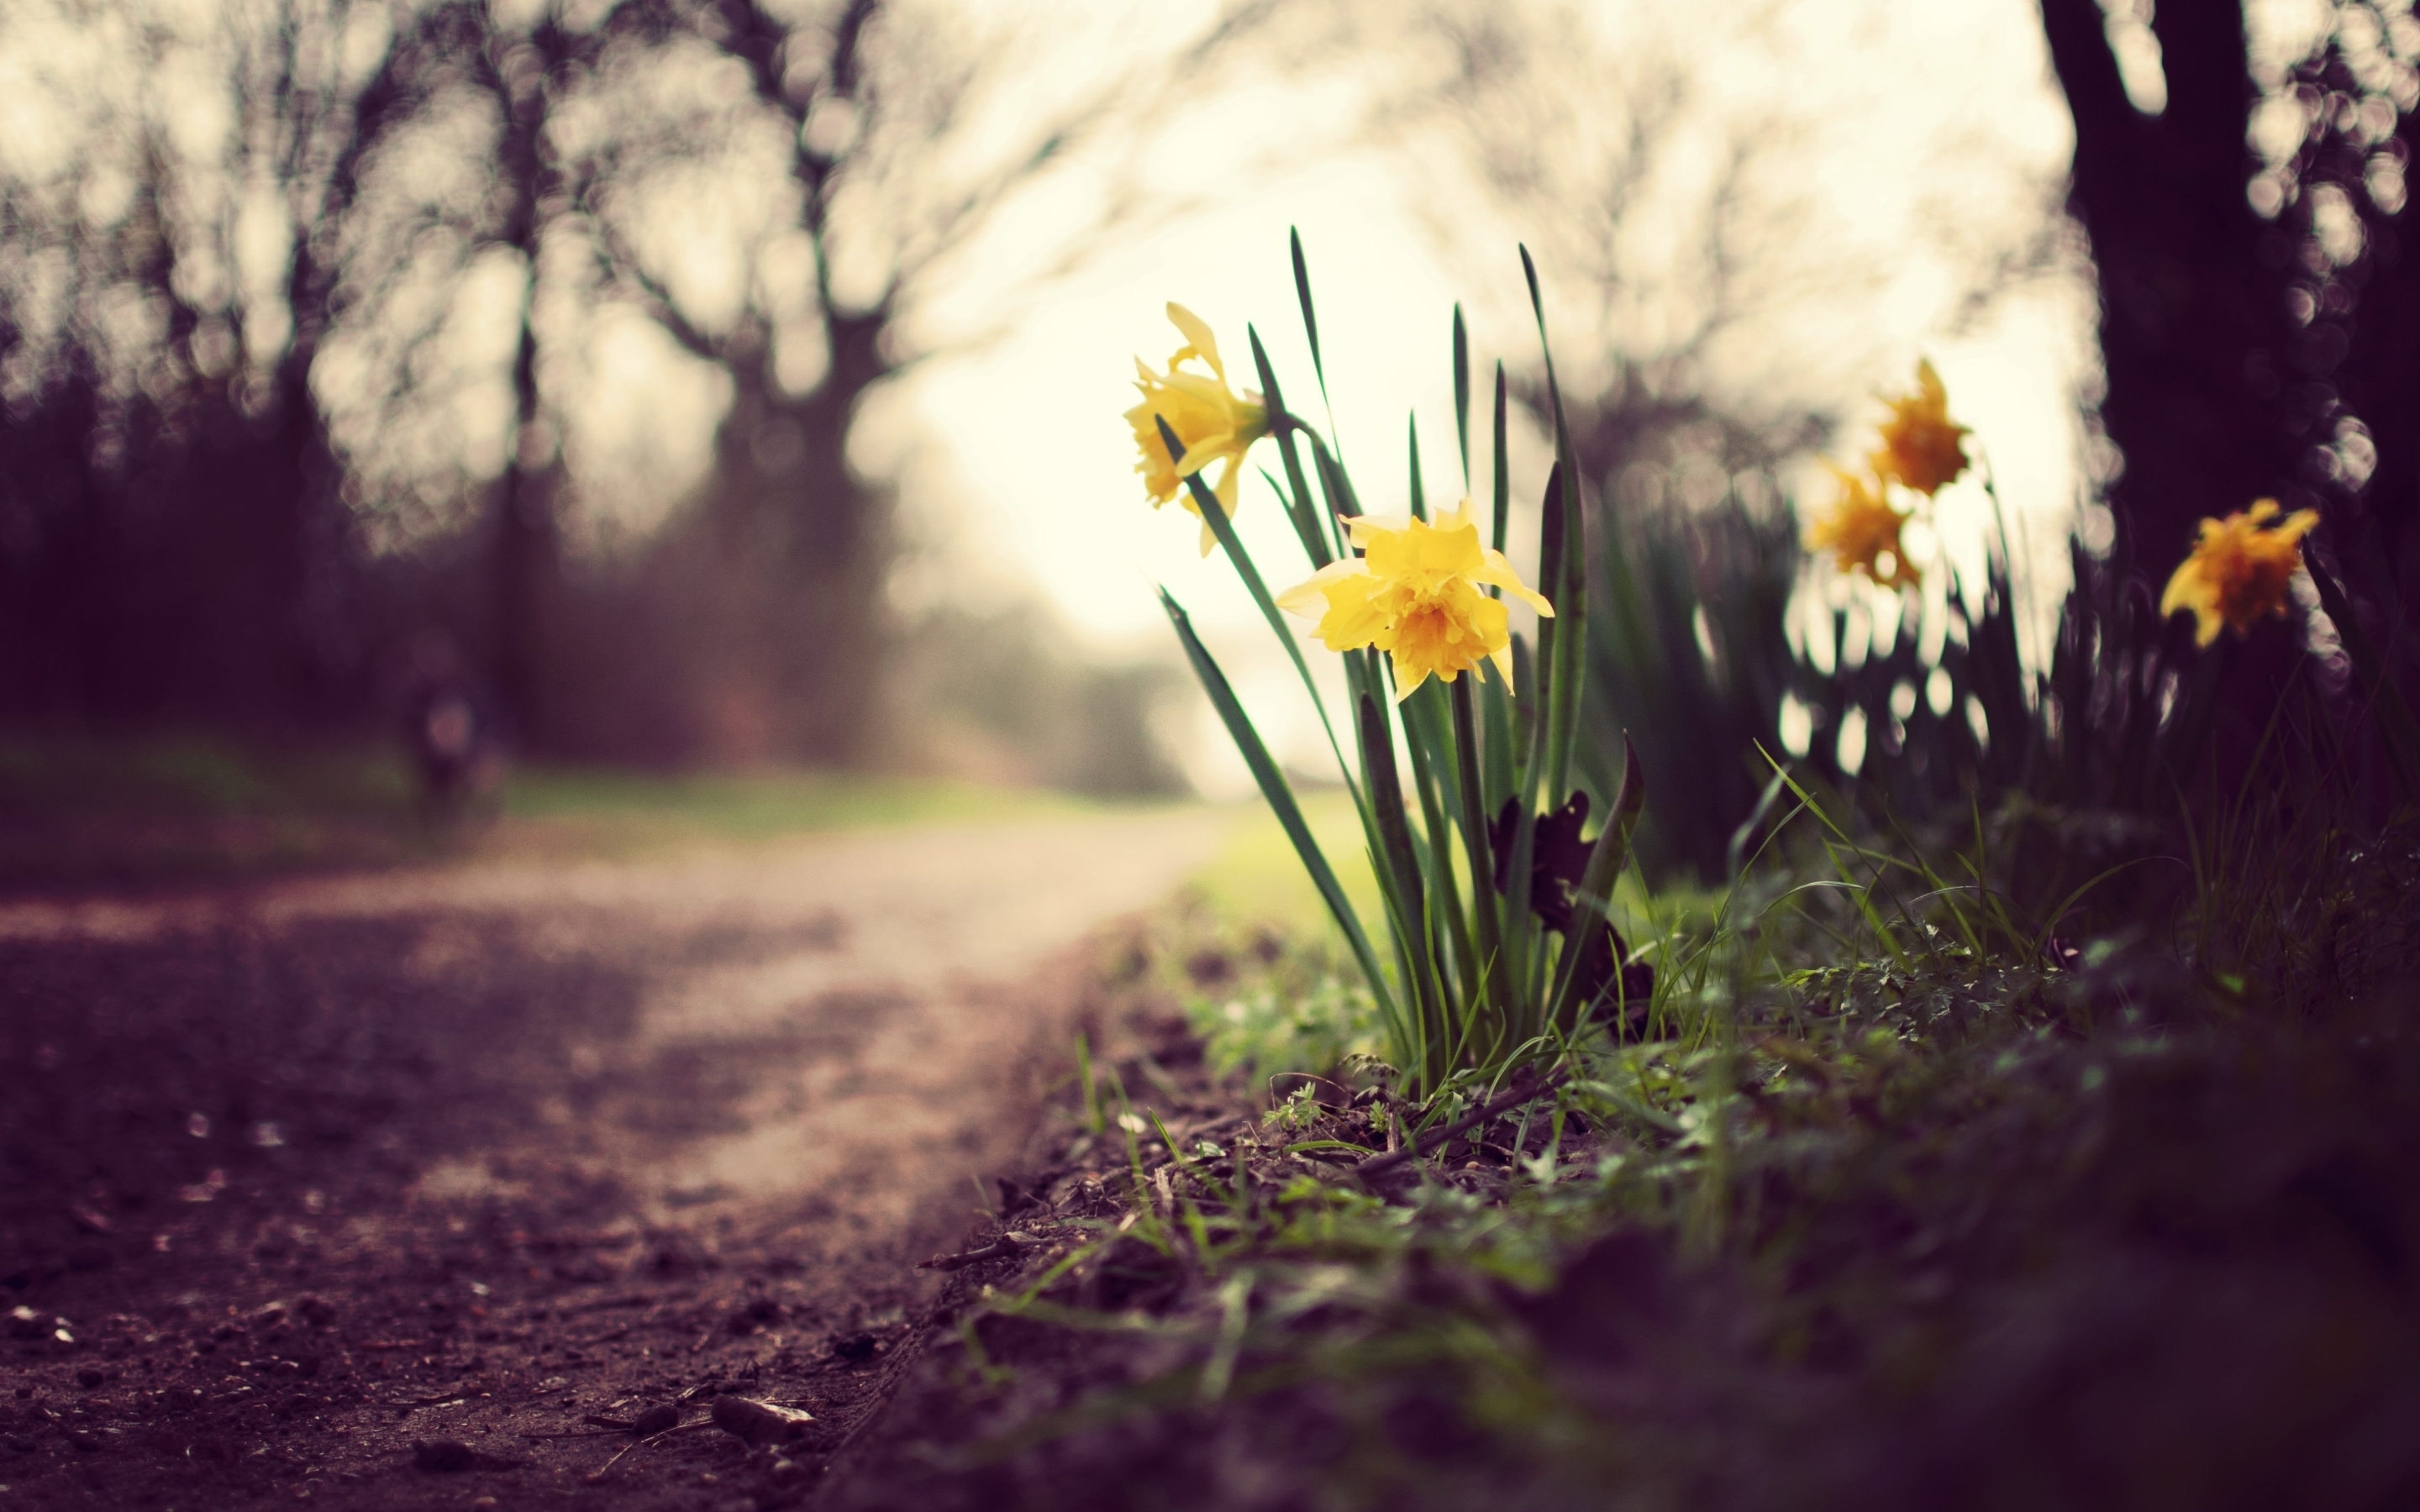 Daffodils on the Road for 2880 x 1800 Retina Display resolution